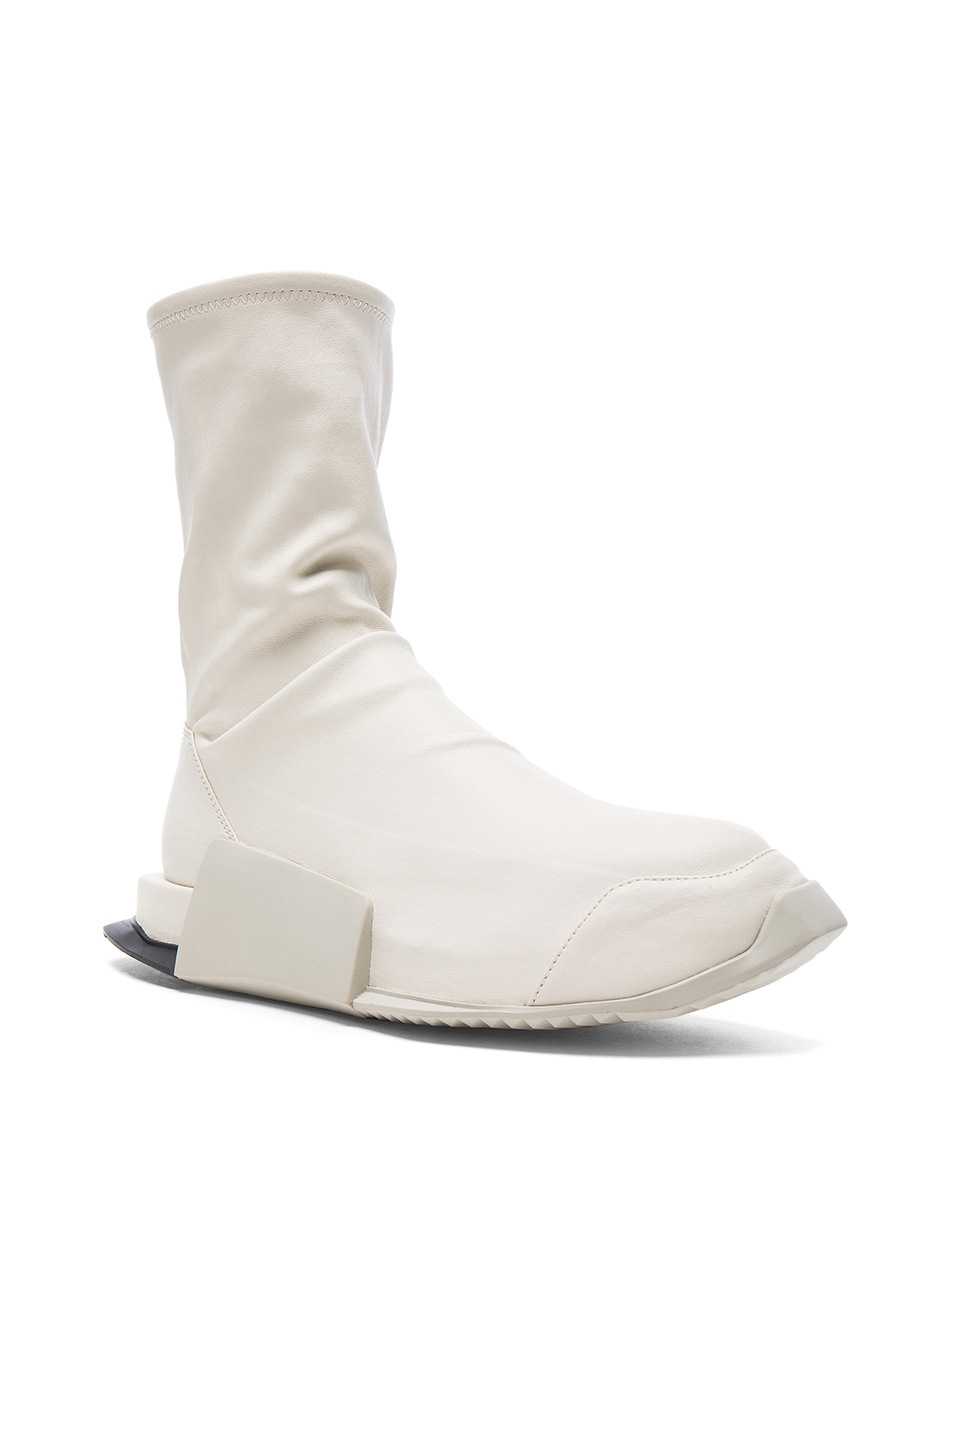 Image 1 of Rick Owens x Adidas Level Stretch Leather Socks in White